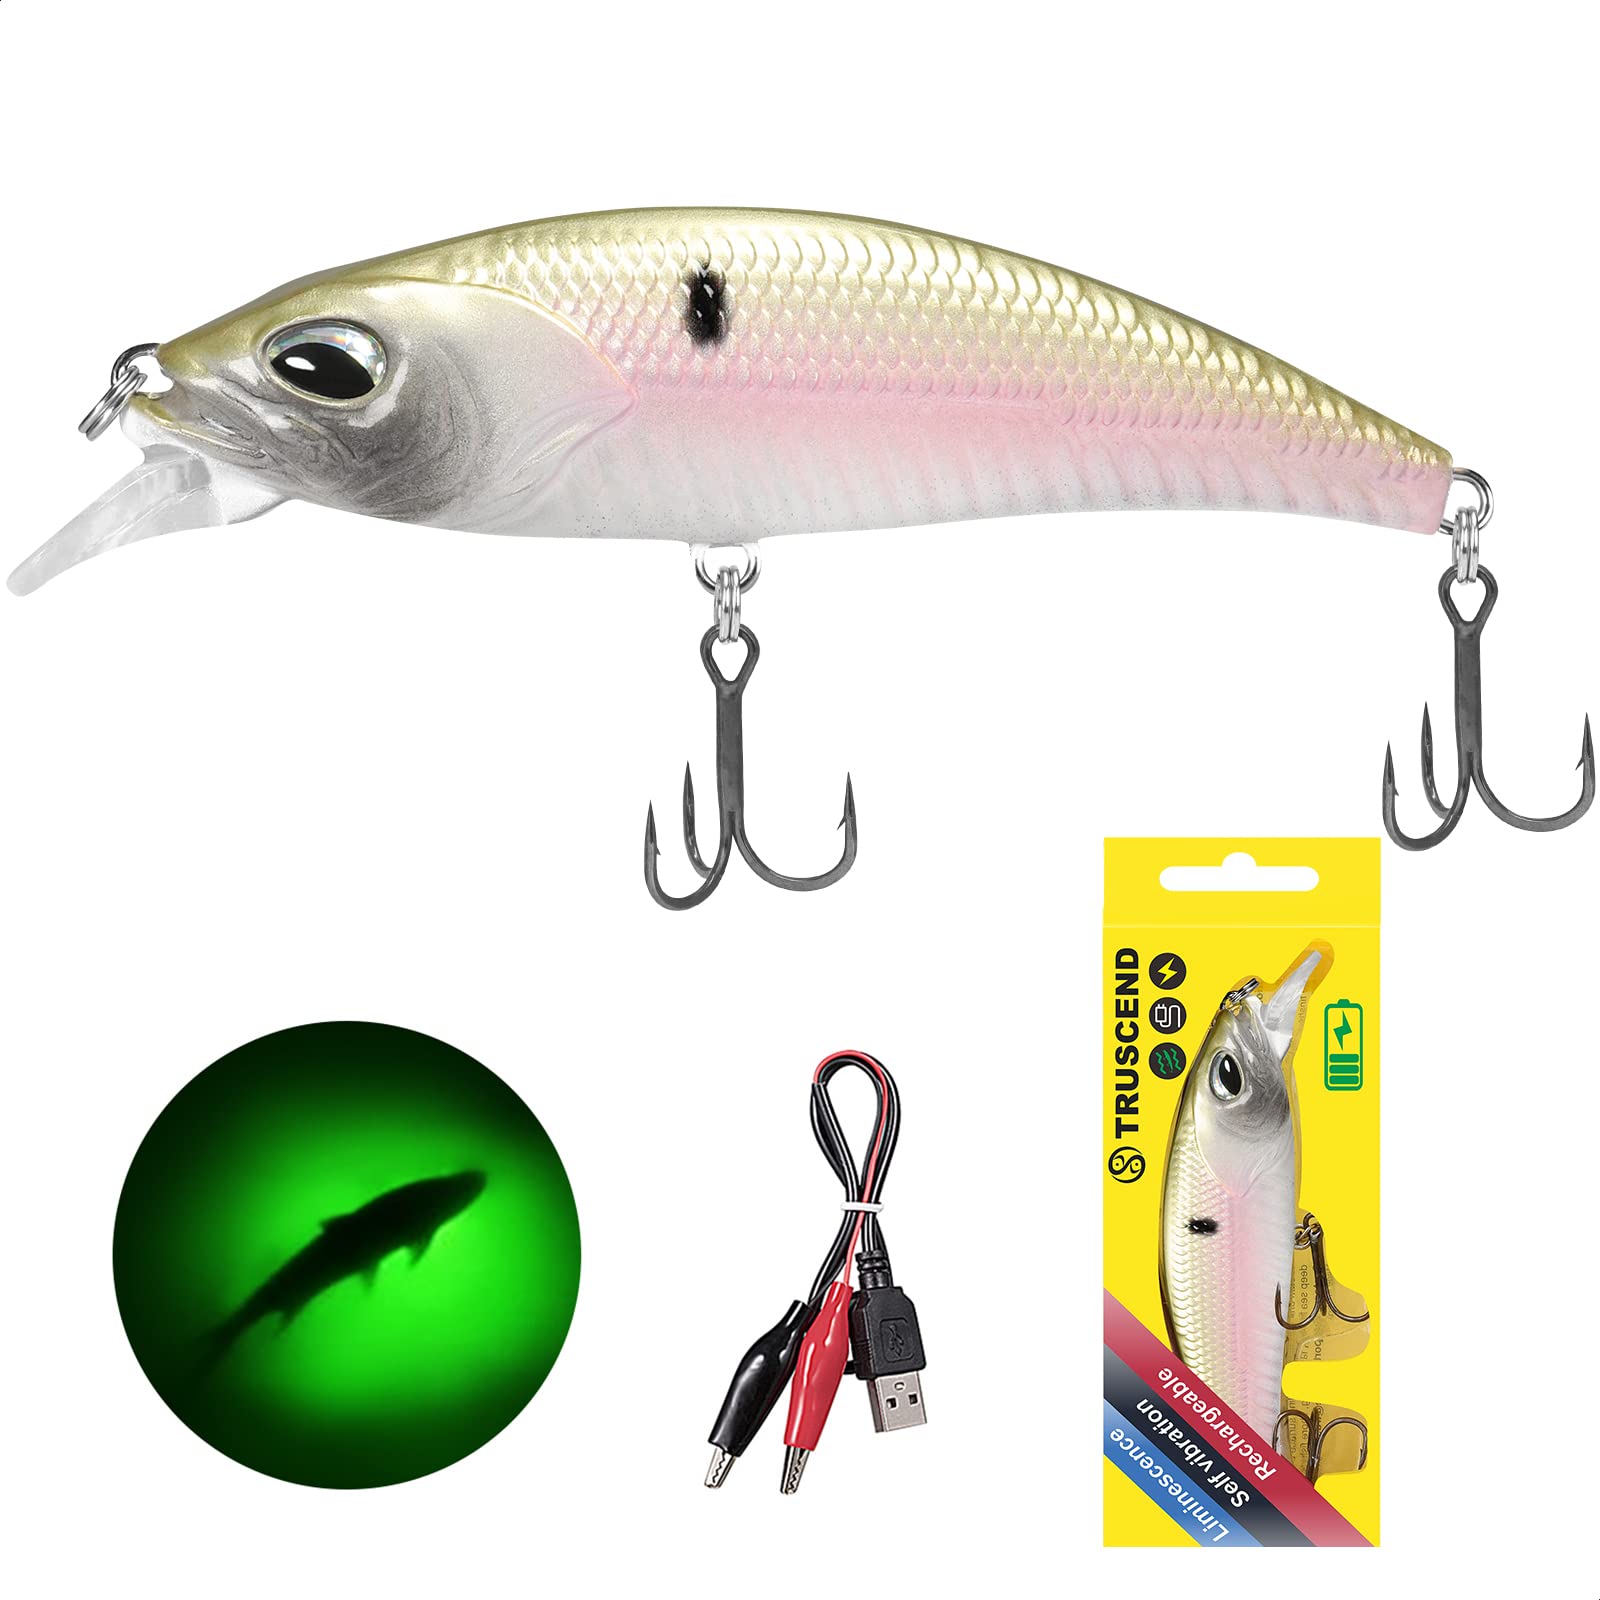 TRUSCEND Electric Twitching Jerkbait, USB Rechargeable LED Lighted